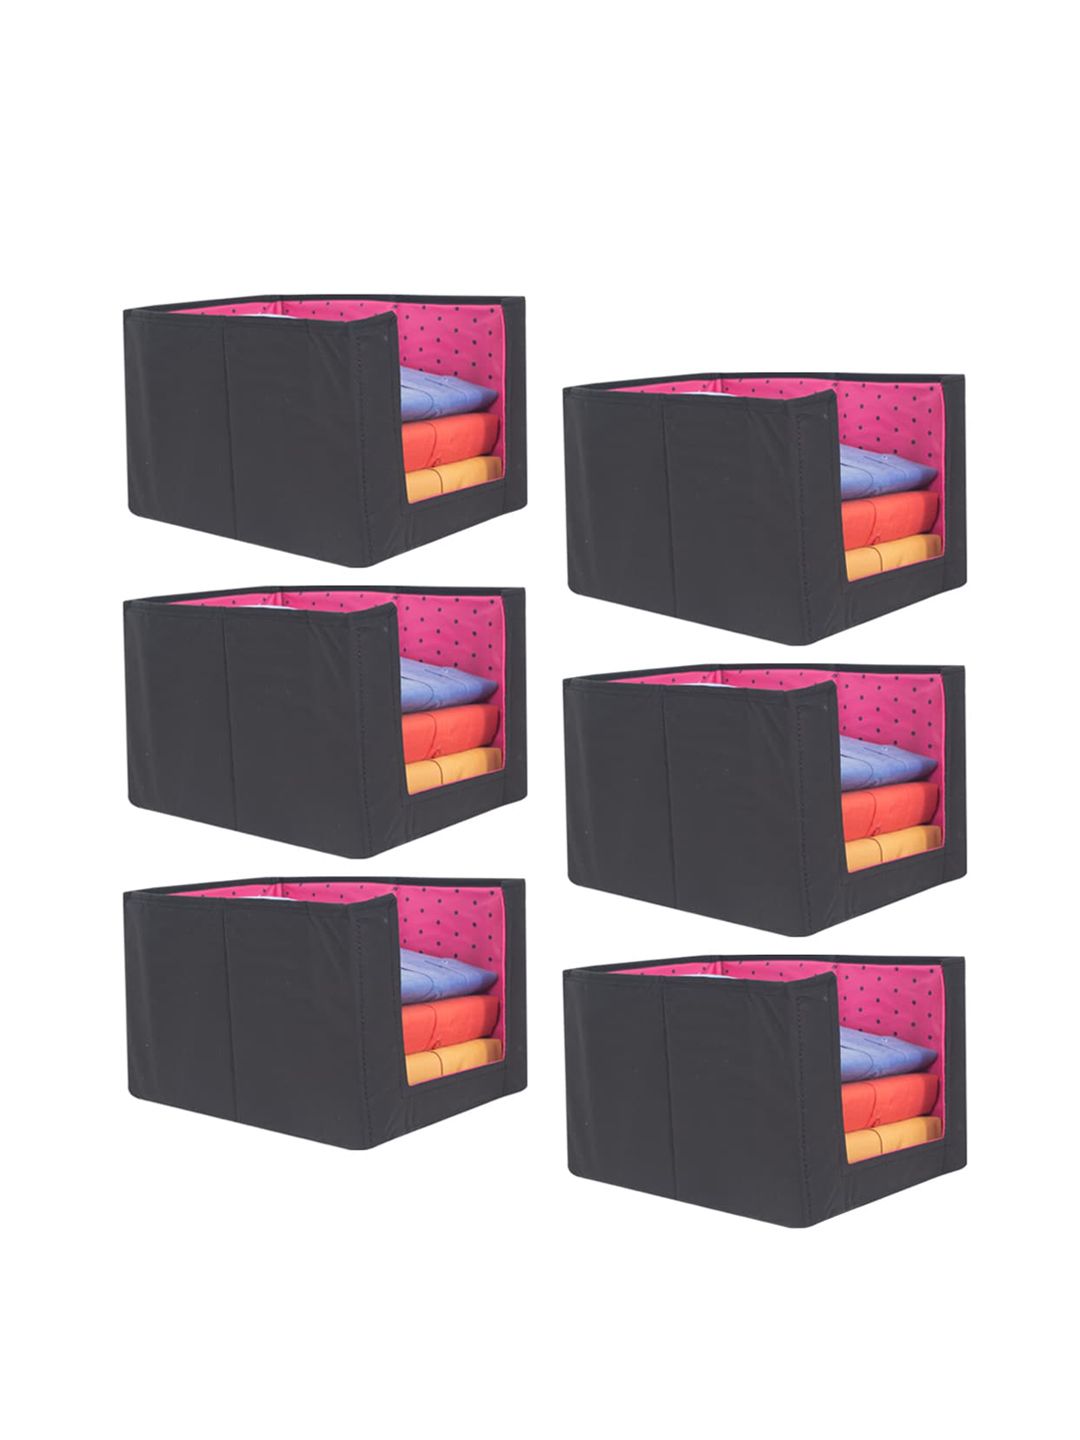 prettykrafts Set Of 6 Black & Pink Solid Foldable Shirt Stacker Wardrobe Organizers Price in India